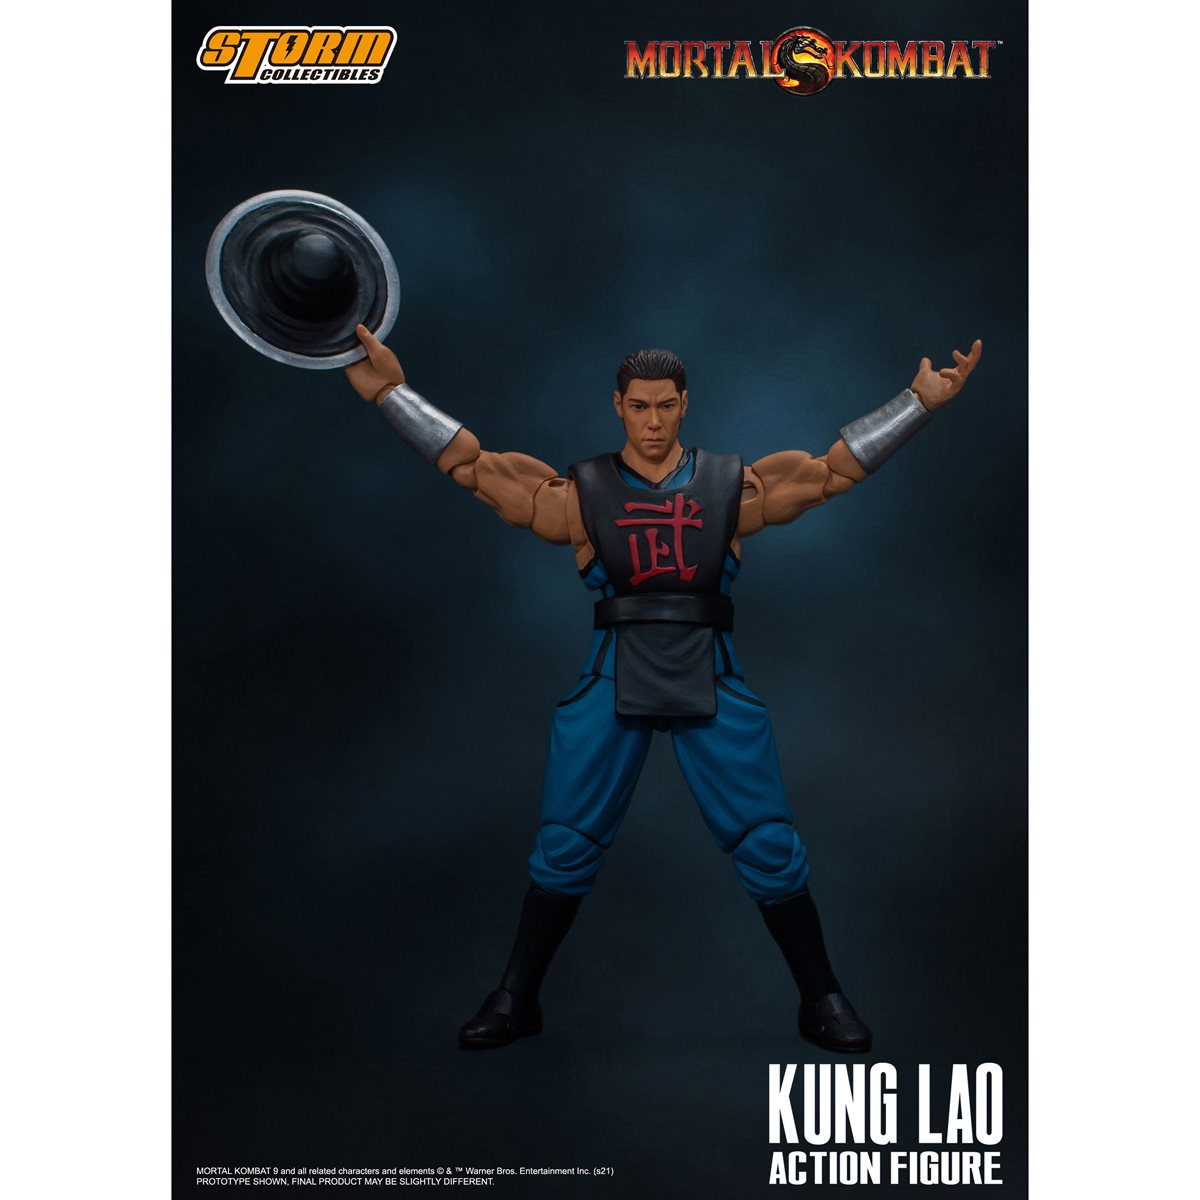 Storm Collectibles - Mortal Kombat Kung Lao 1:12 Scale Action Figure